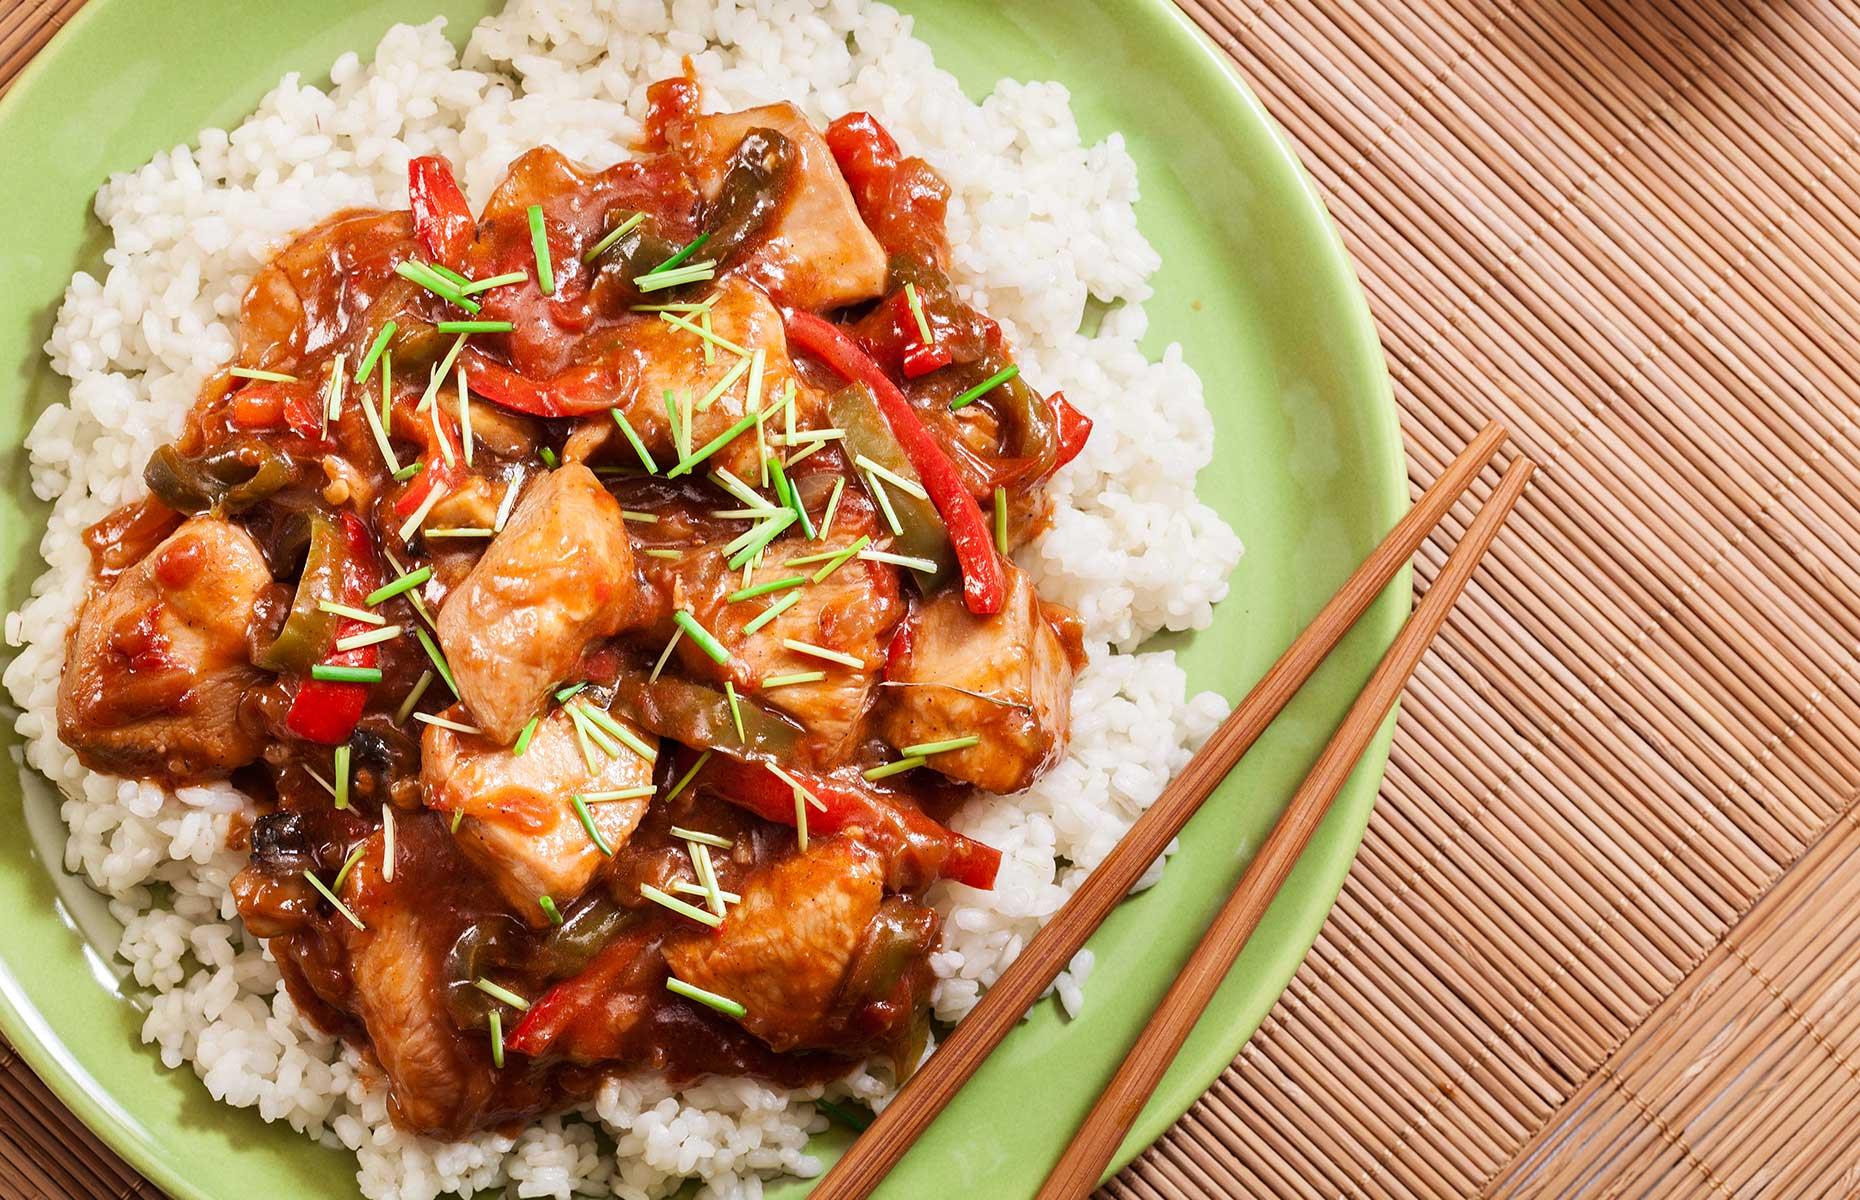 Under 30 minutes: sweet and sour stir-fry